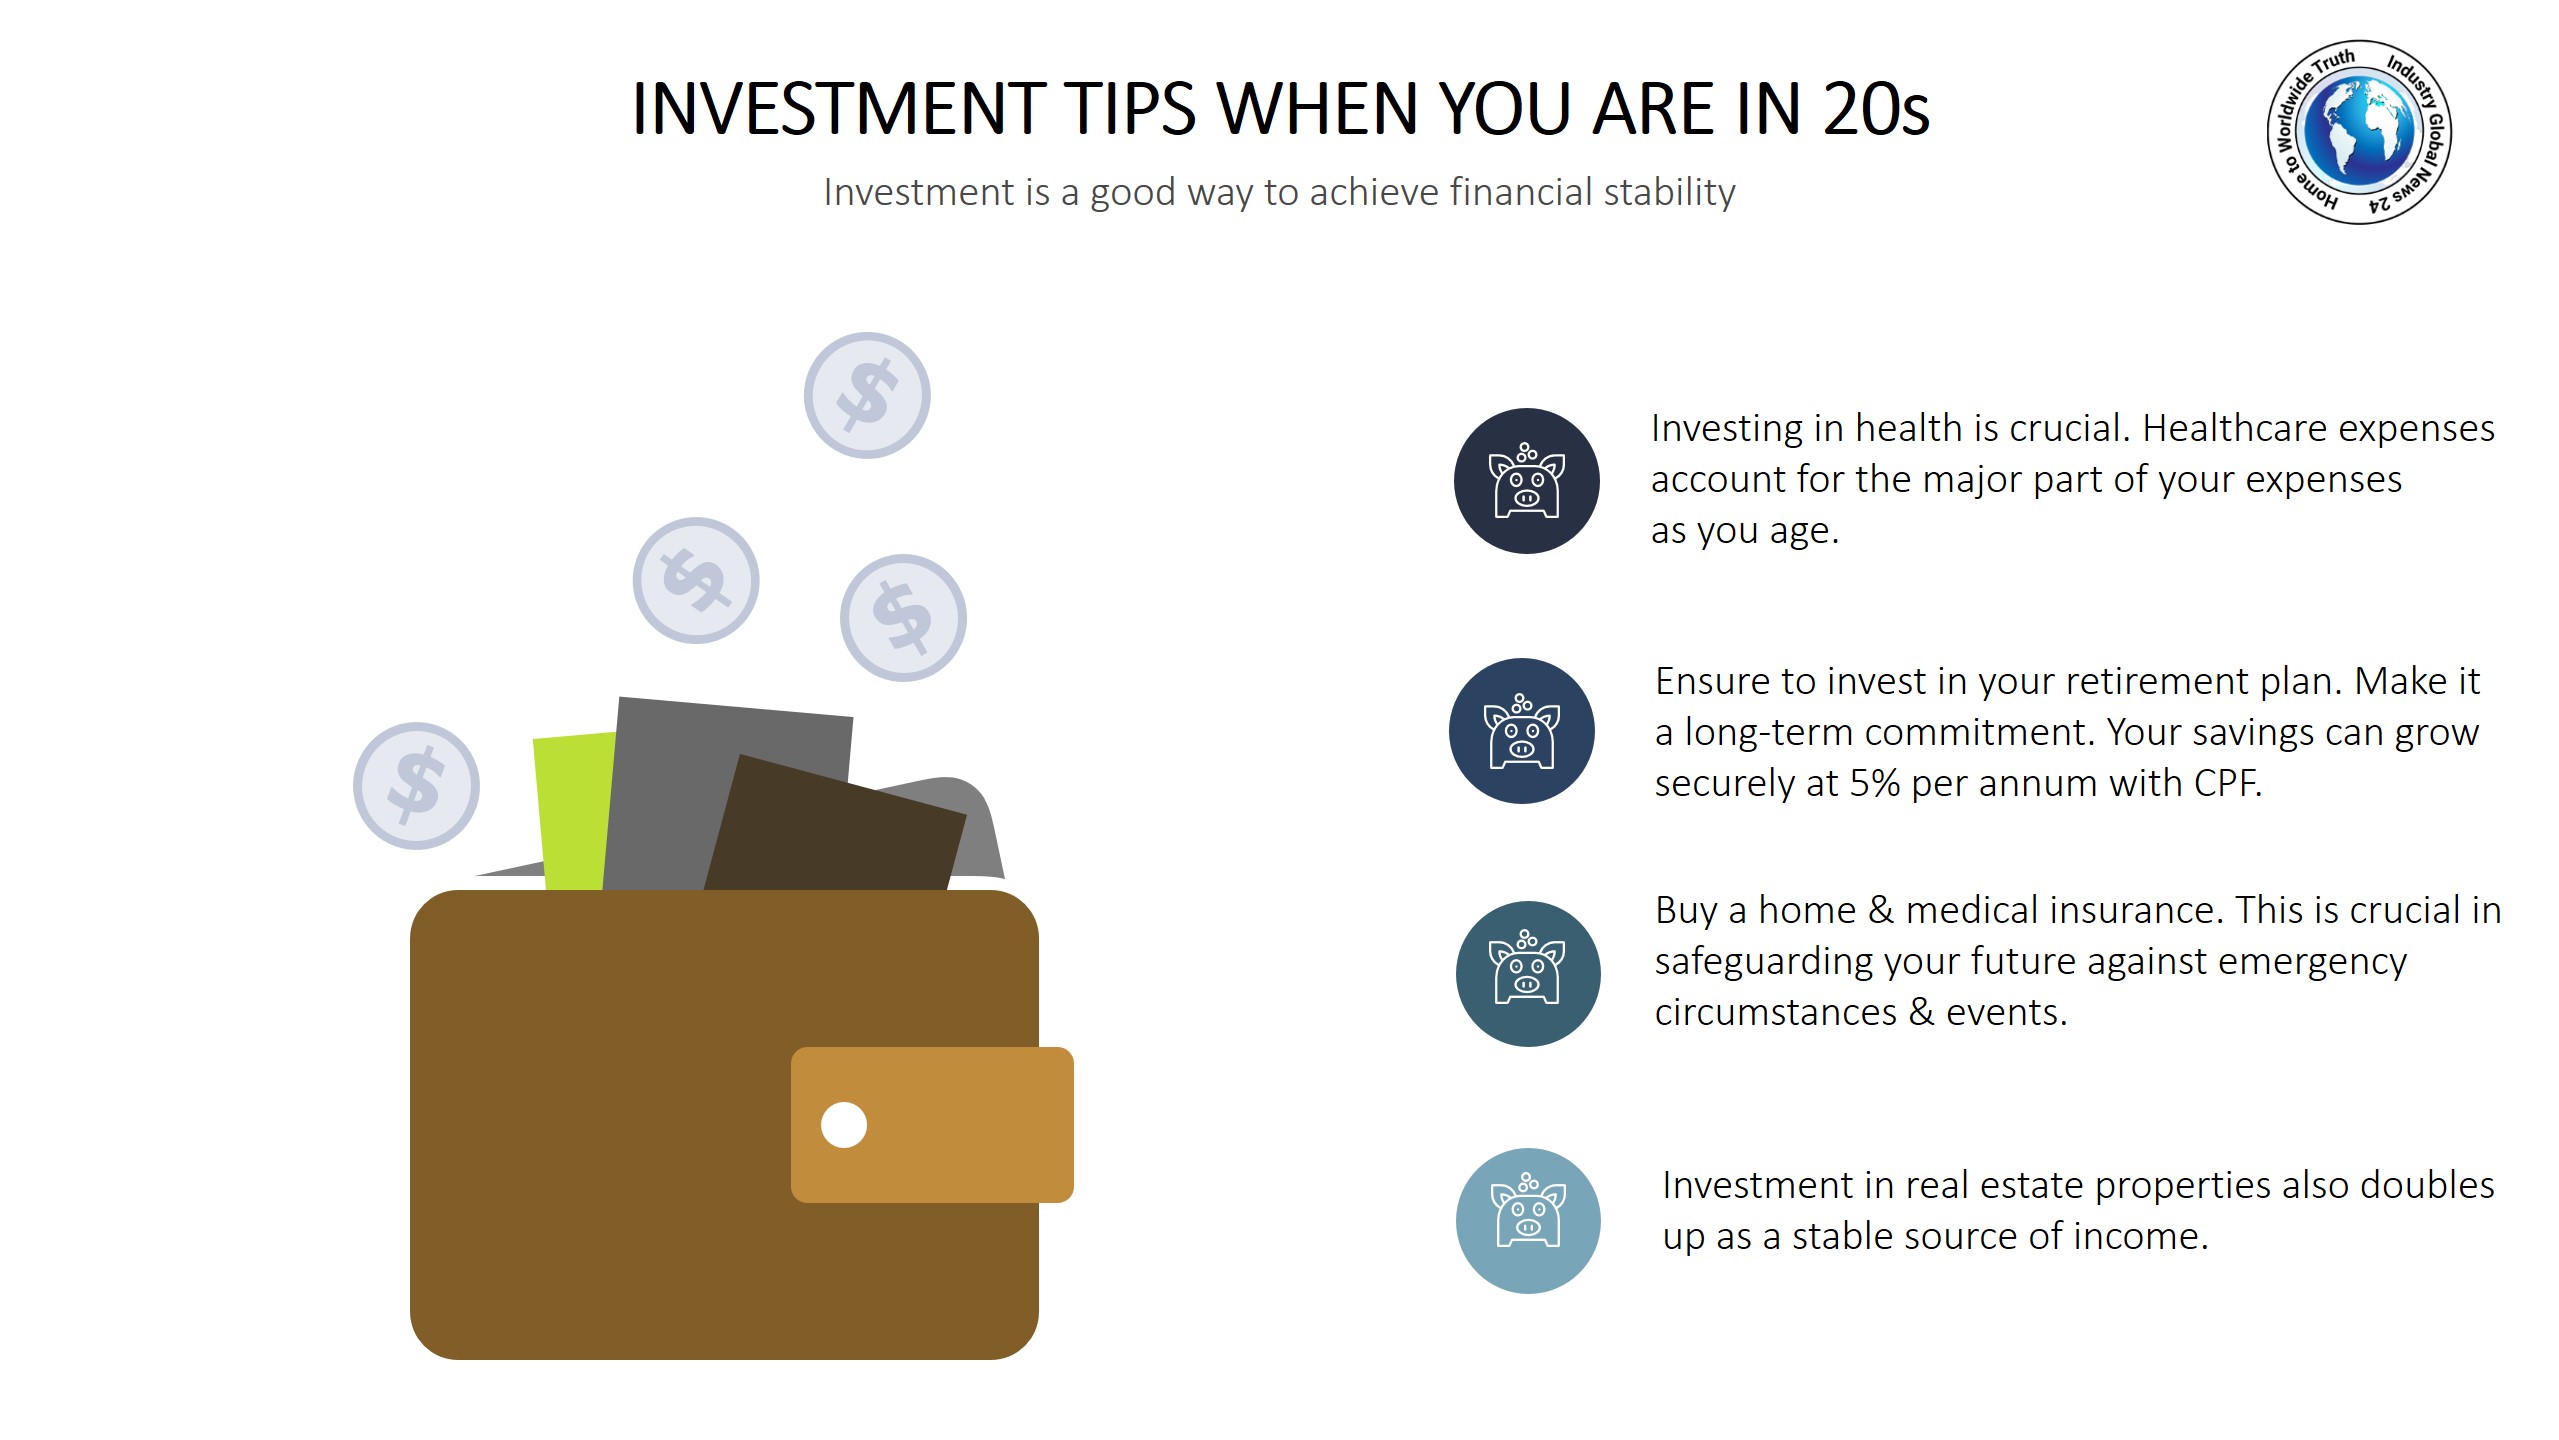 Investment tips when you are in 20s